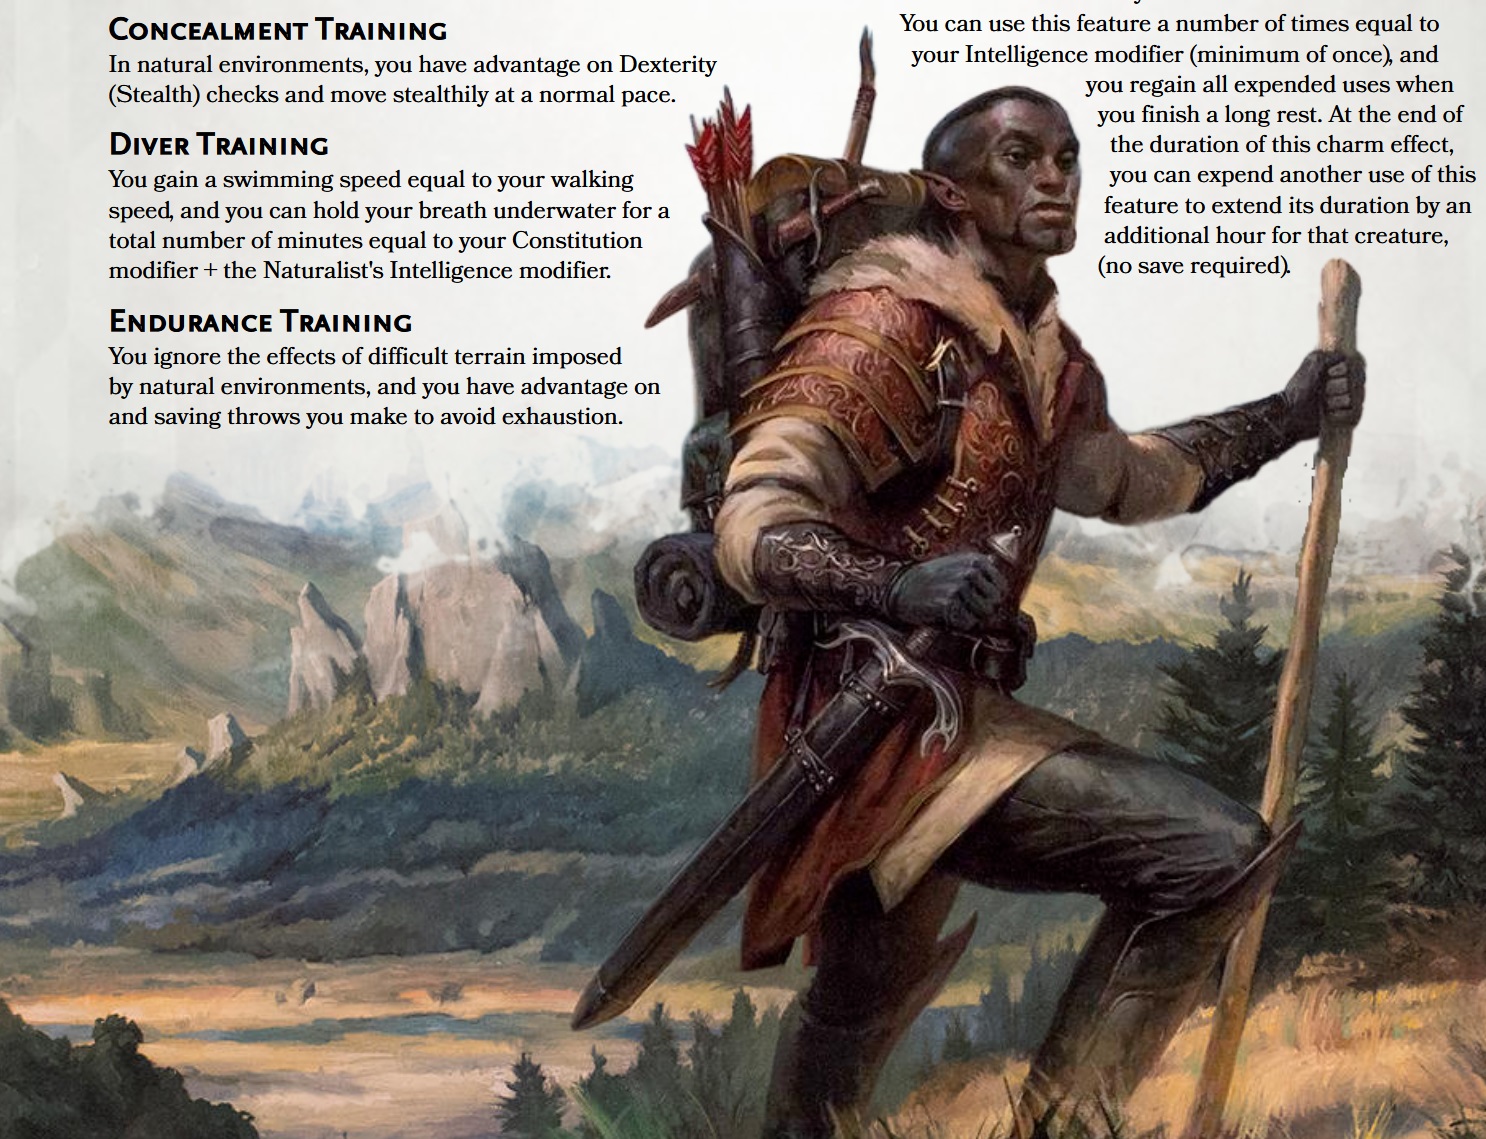 100 Classes ideas  dnd 5e homebrew, dnd classes, dungeons and dragons  classes